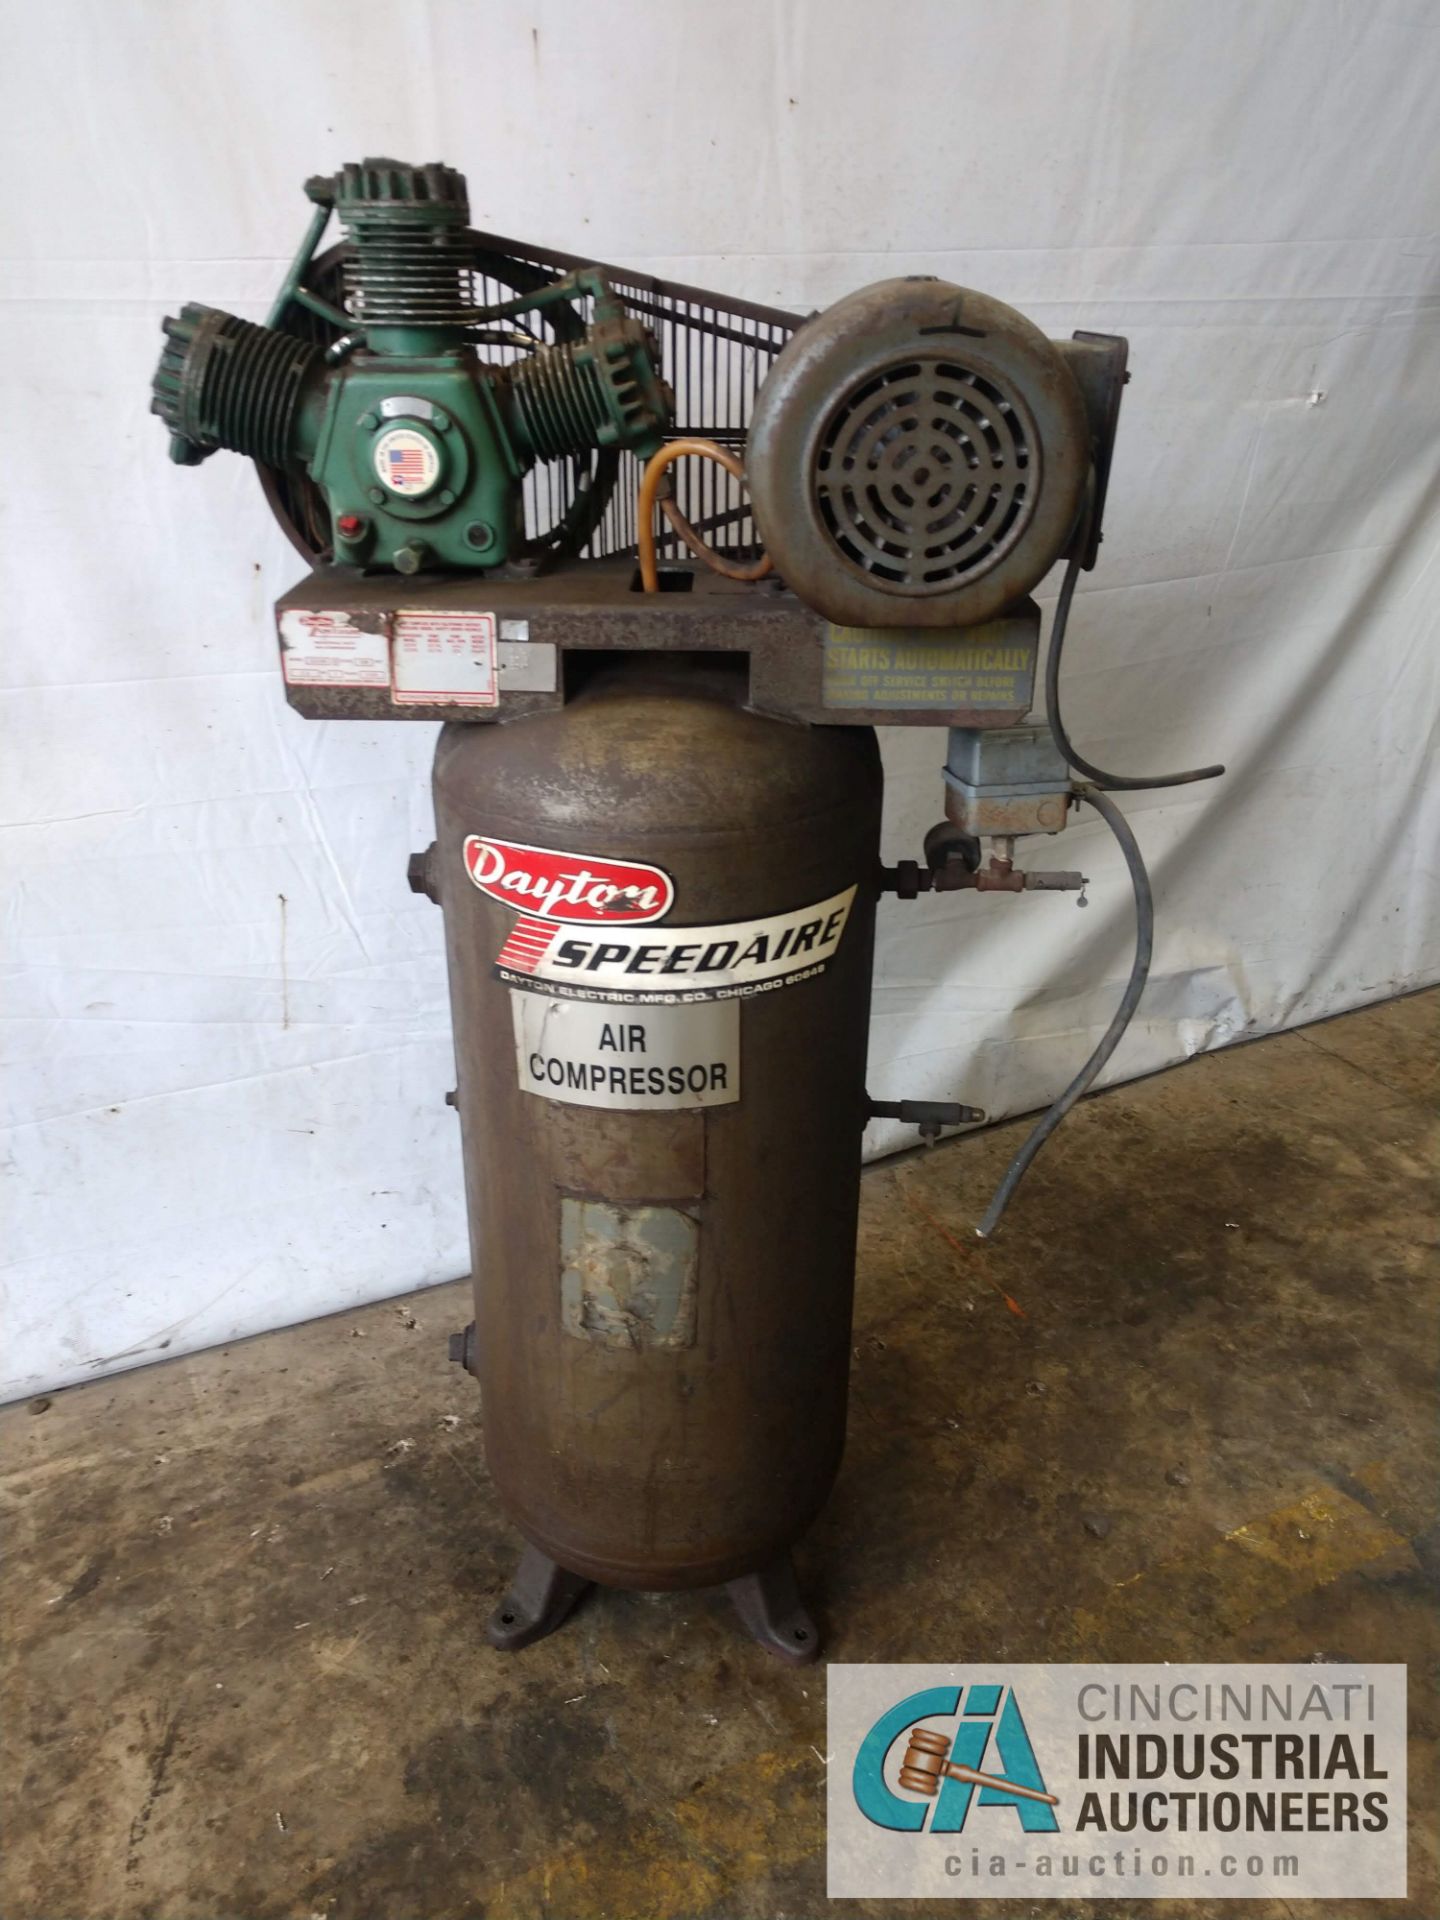 2 HP SPEEDAIRE MODEL 3Z219B AIR COMPRESSOR - $20.00 Rigging Fee Due to Onsite Rigger - Located in